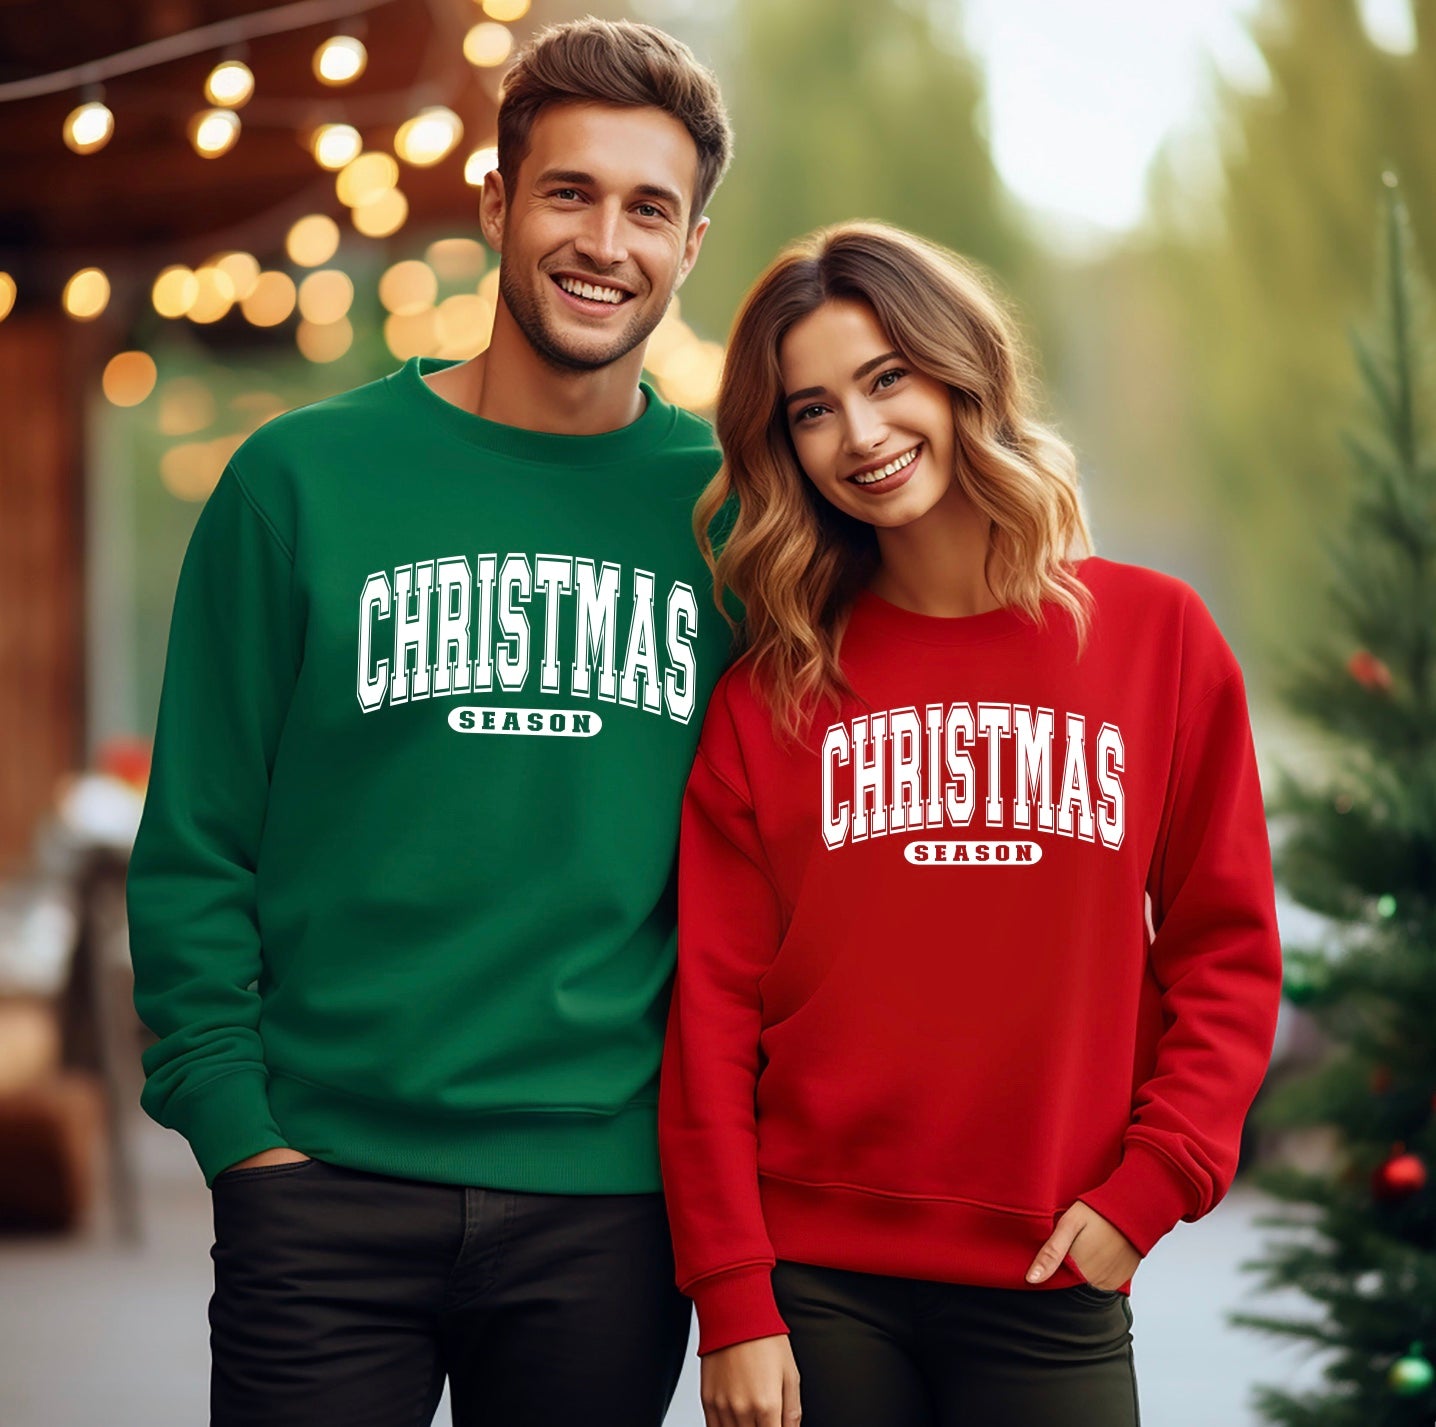 Christmas season varsity font unisex crewneck sweatshirt for couples in red and green